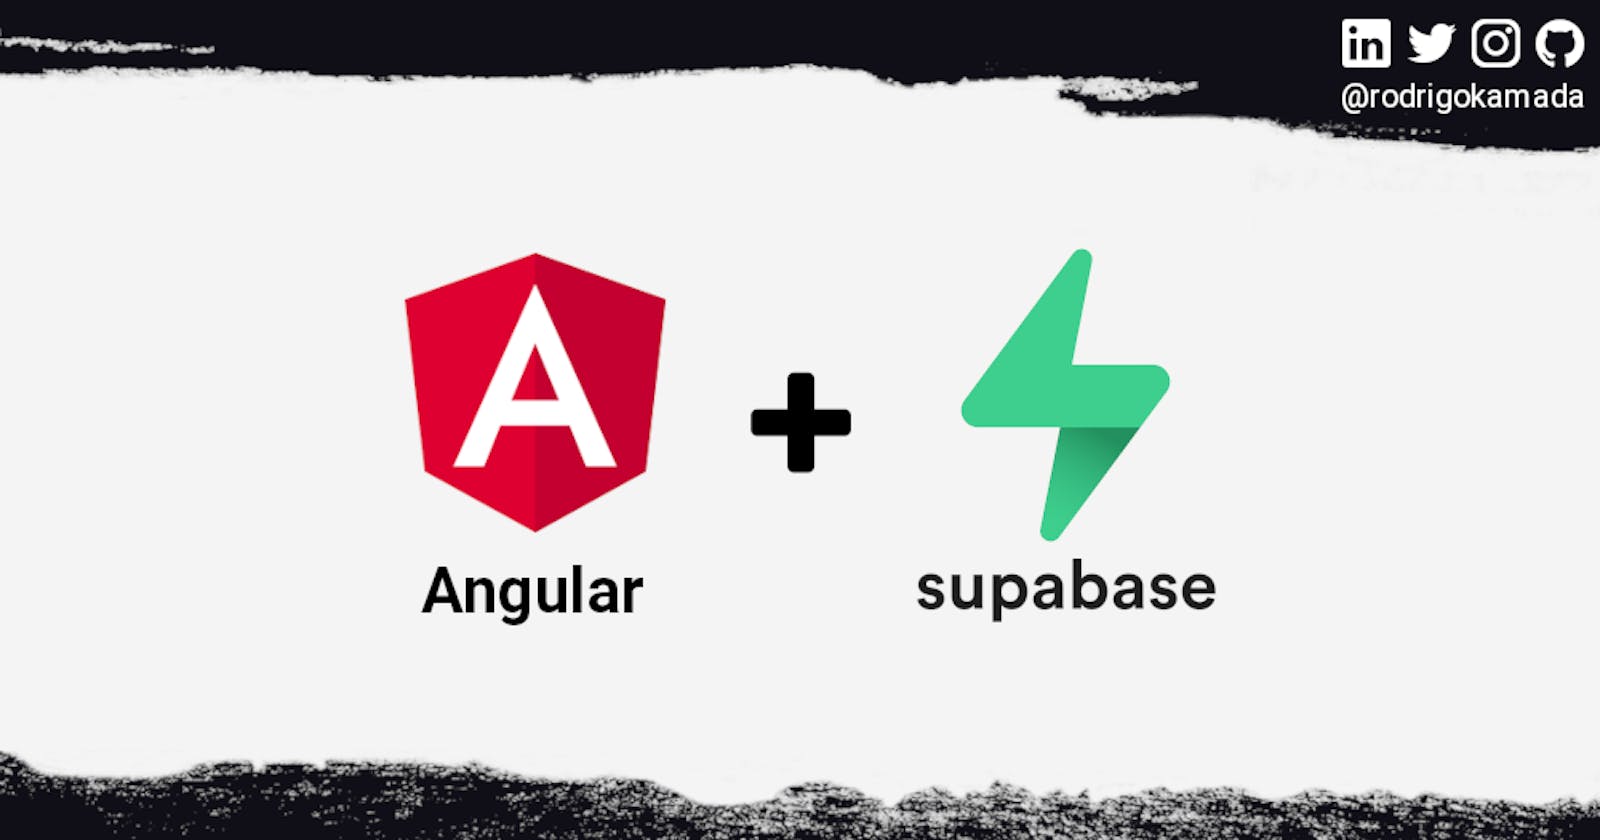 Authentication using the Supabase to an Angular application